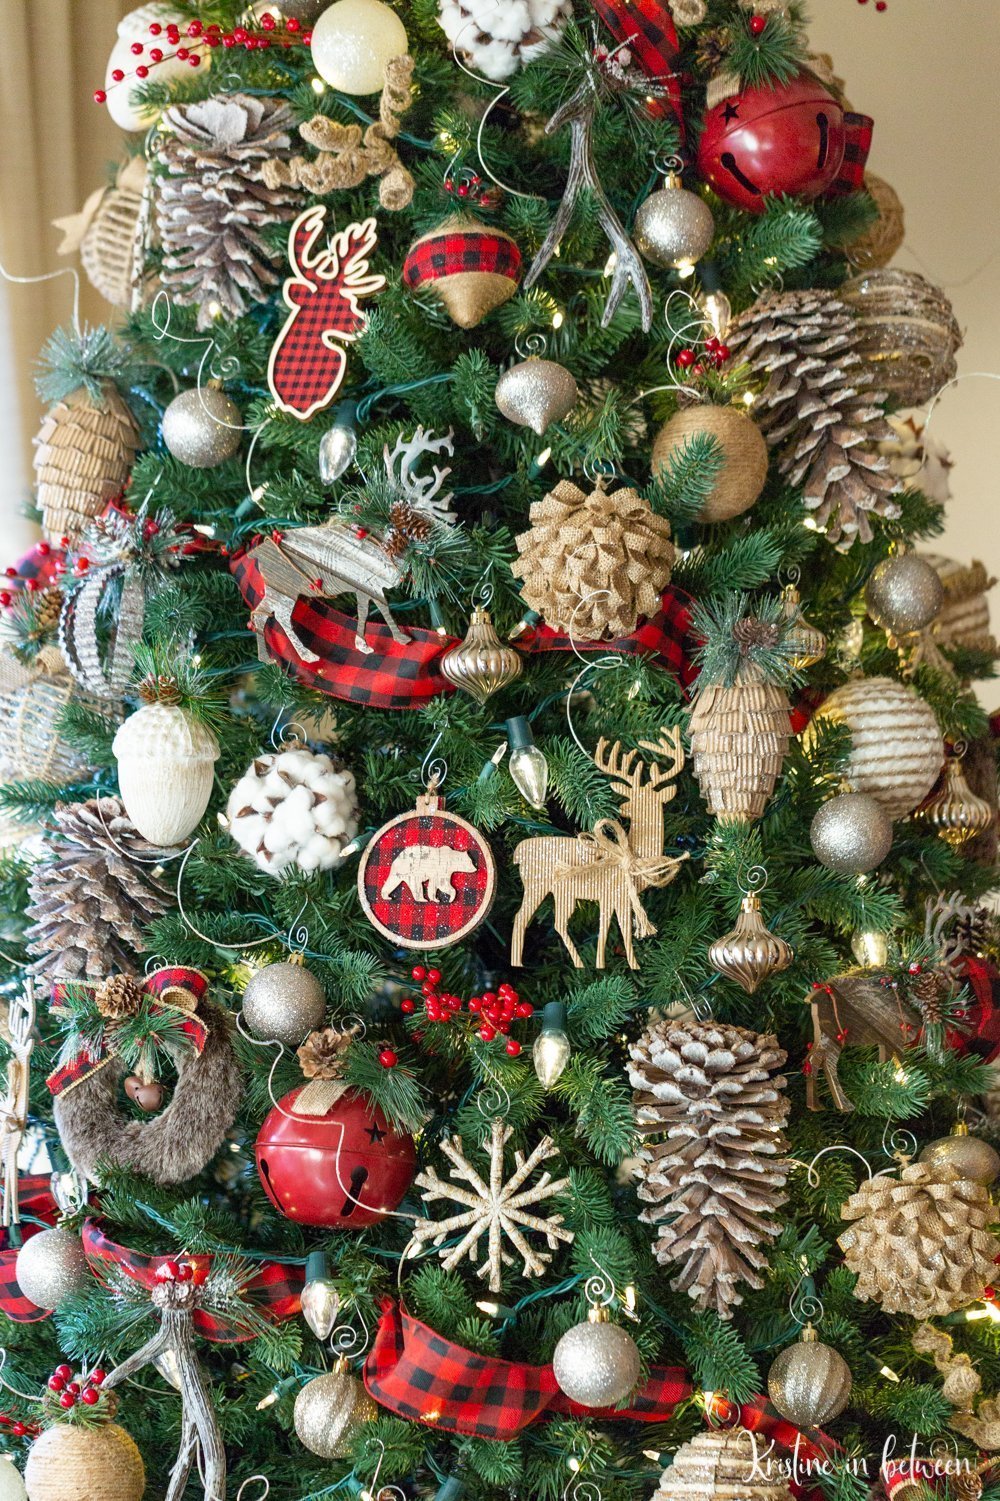 How to recycle your Christmas ornaments year after year for a whole new look! Gorgeous buffalo check and reds for this year!